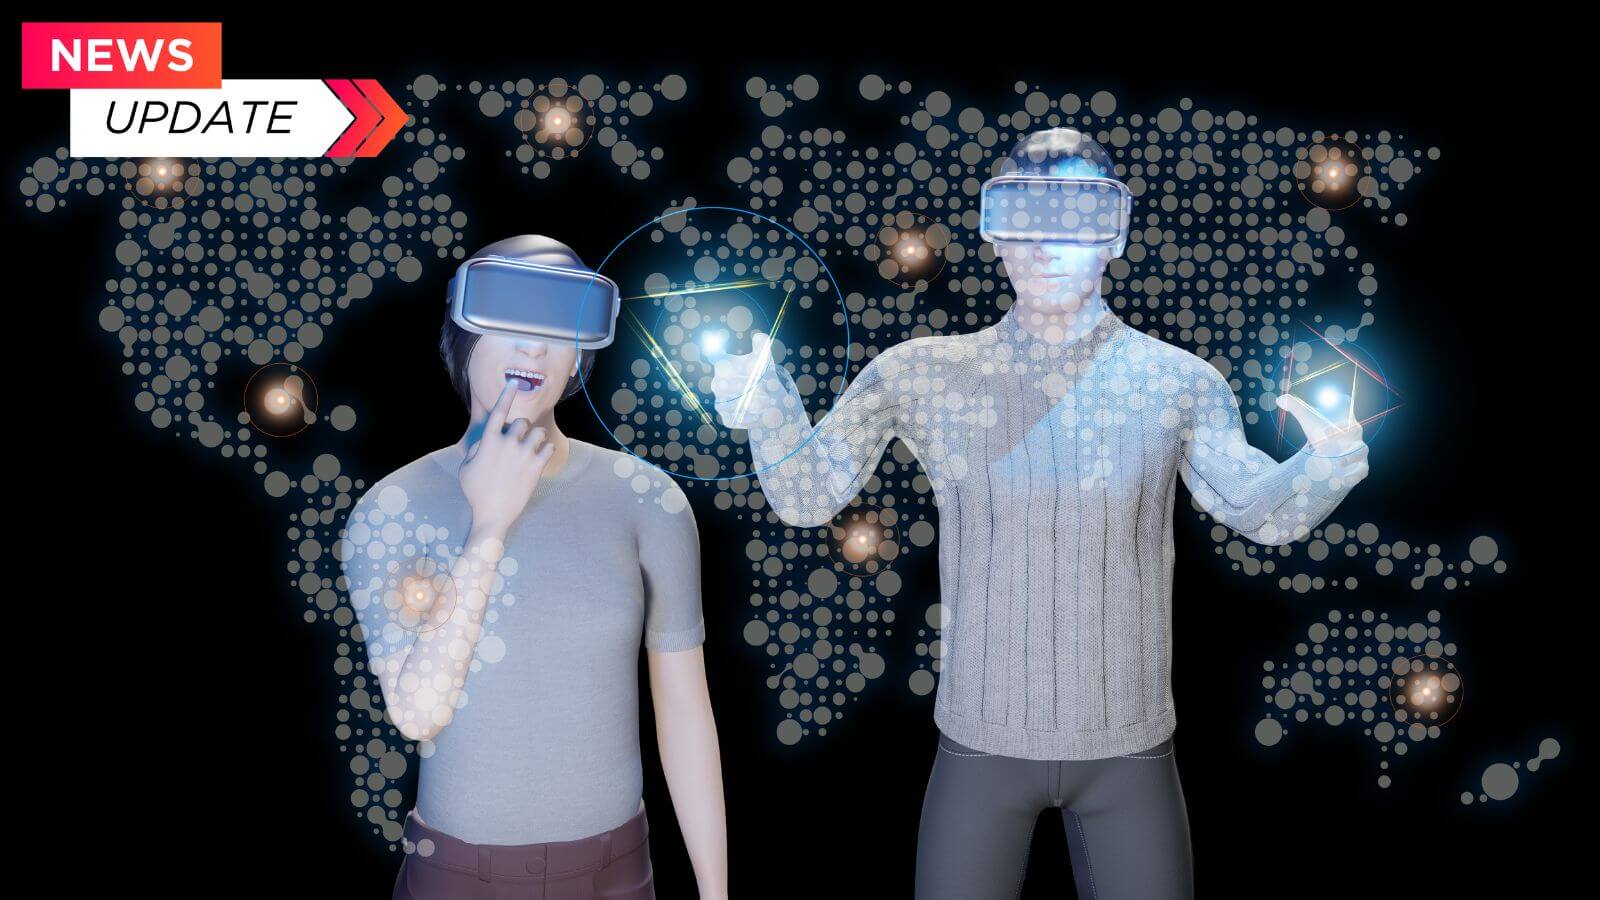 By 2030, the global metaverse market could be worth $322 billion